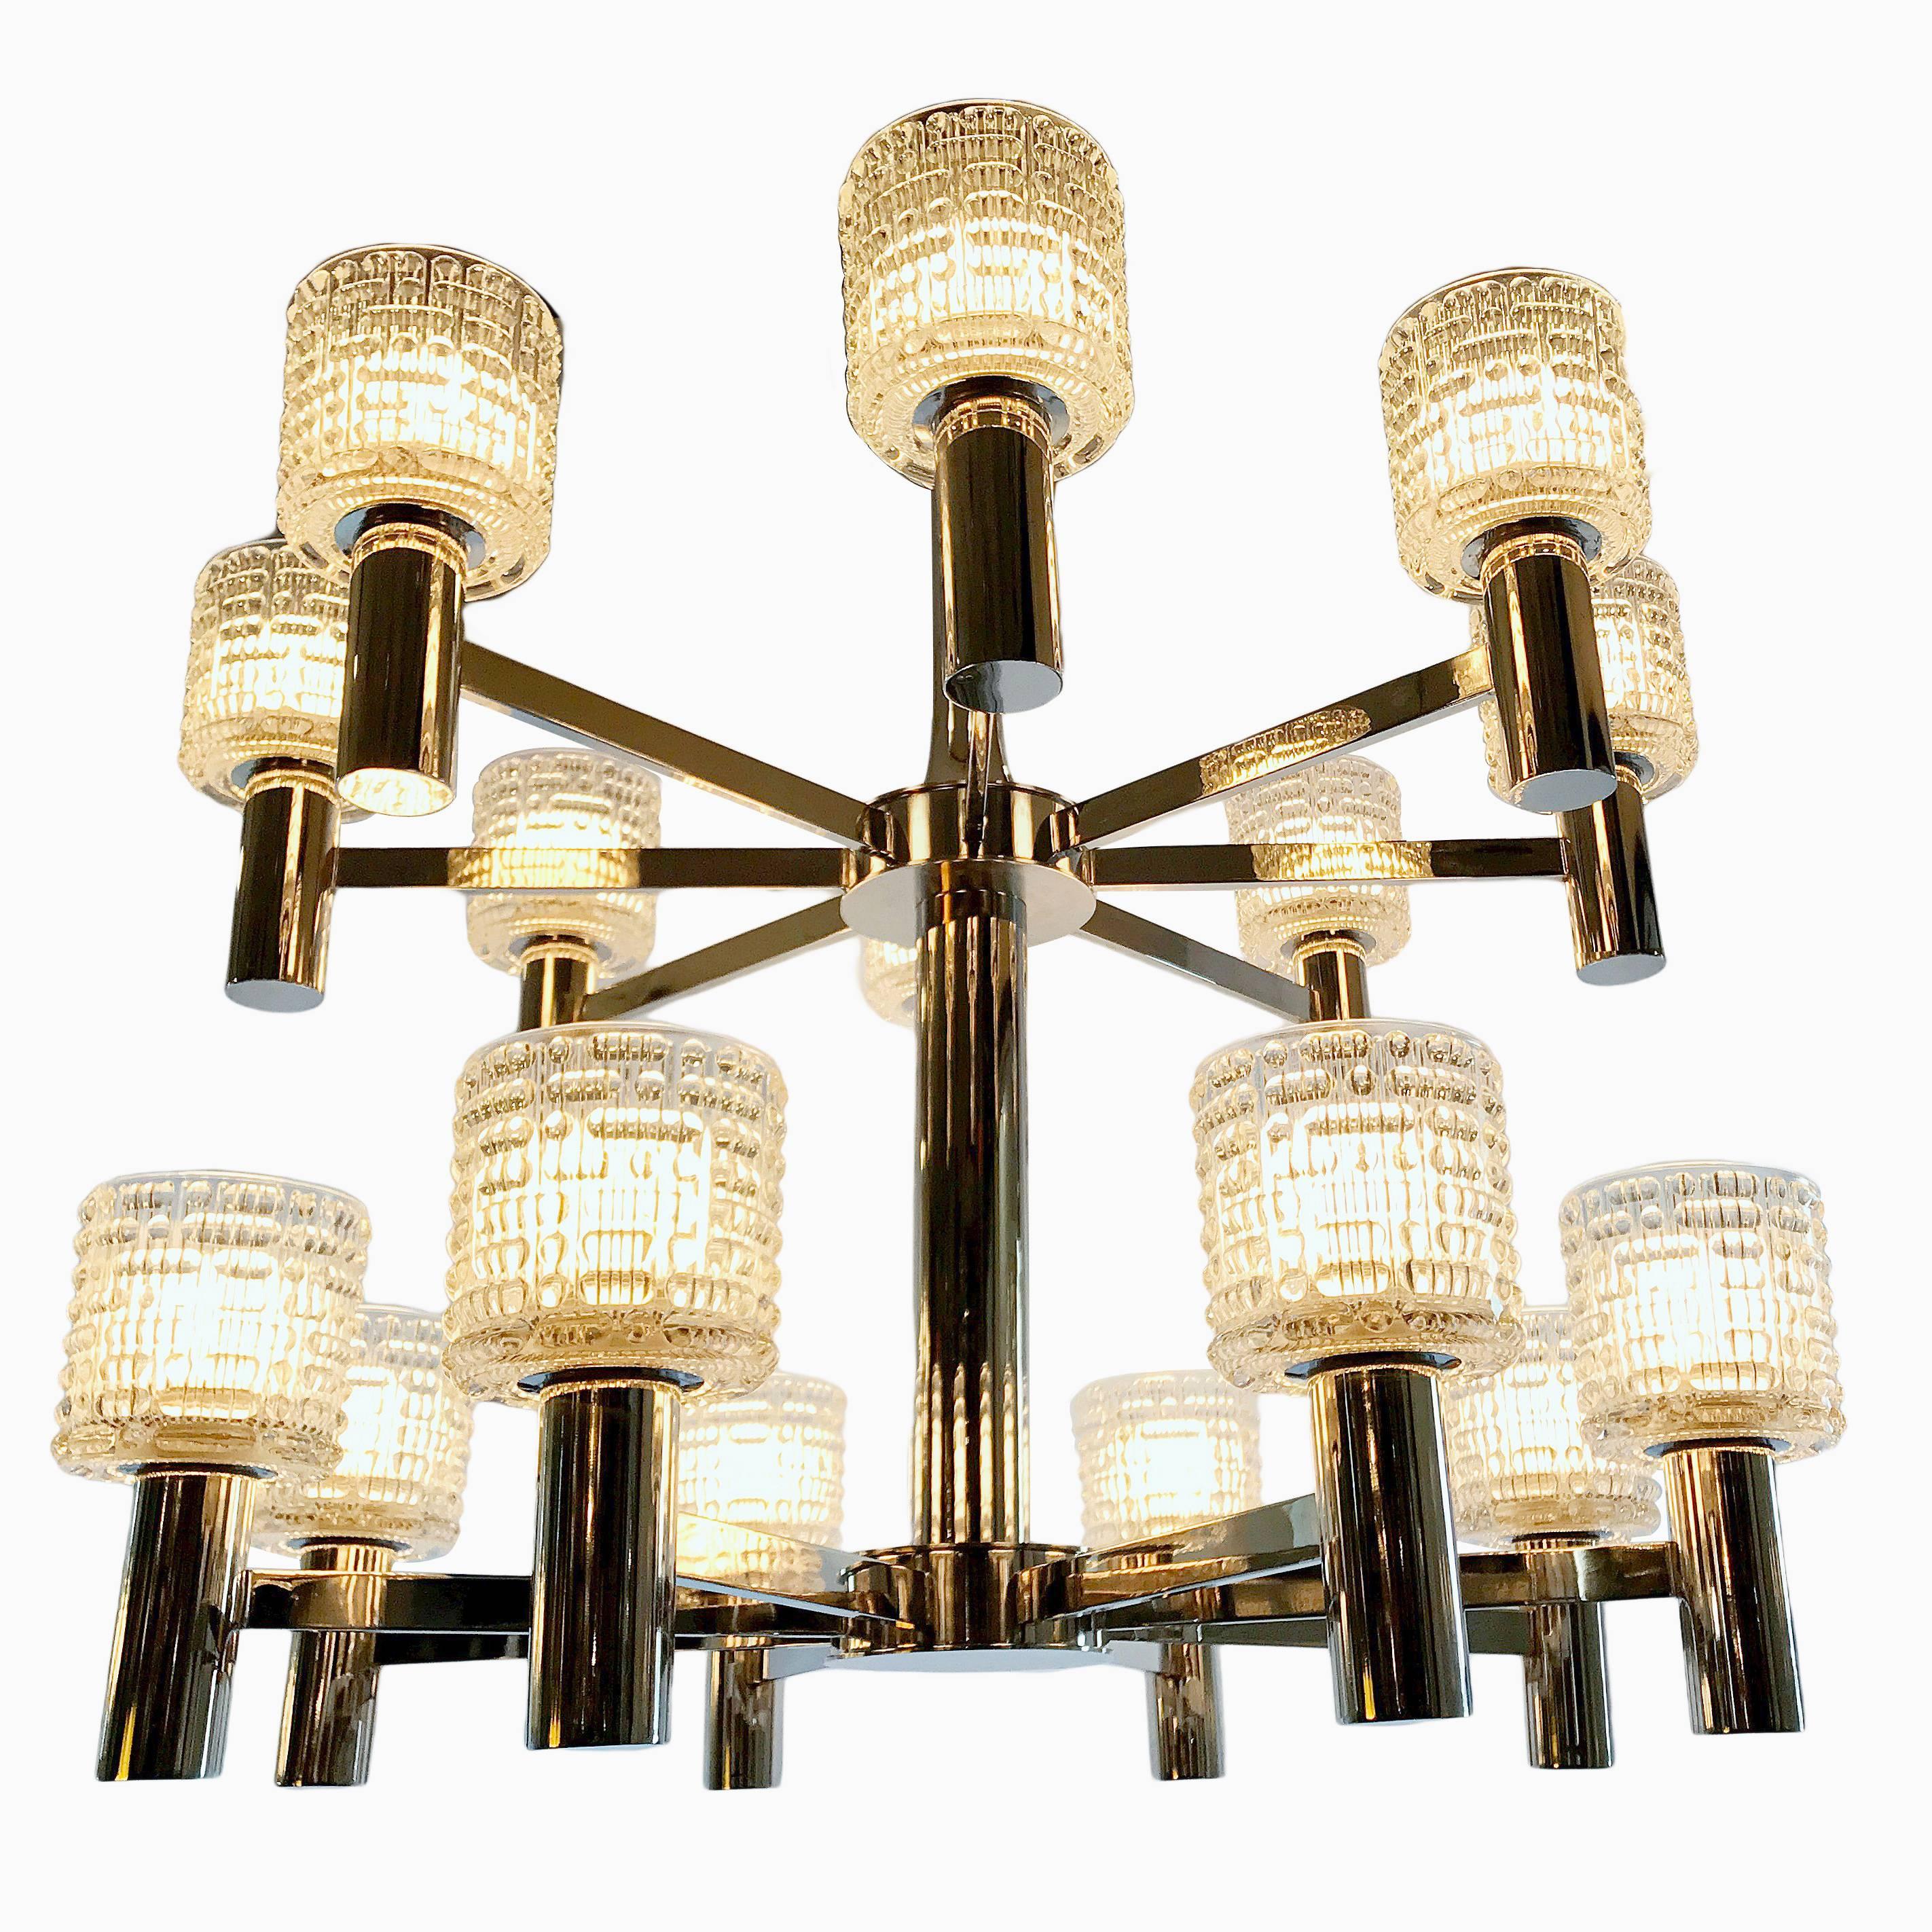 A Swedish circa 1960's double-tiered chandelier with 16 lights, nickel-plated finish, circa 1960s. 

Measurements:
Diameter: 34